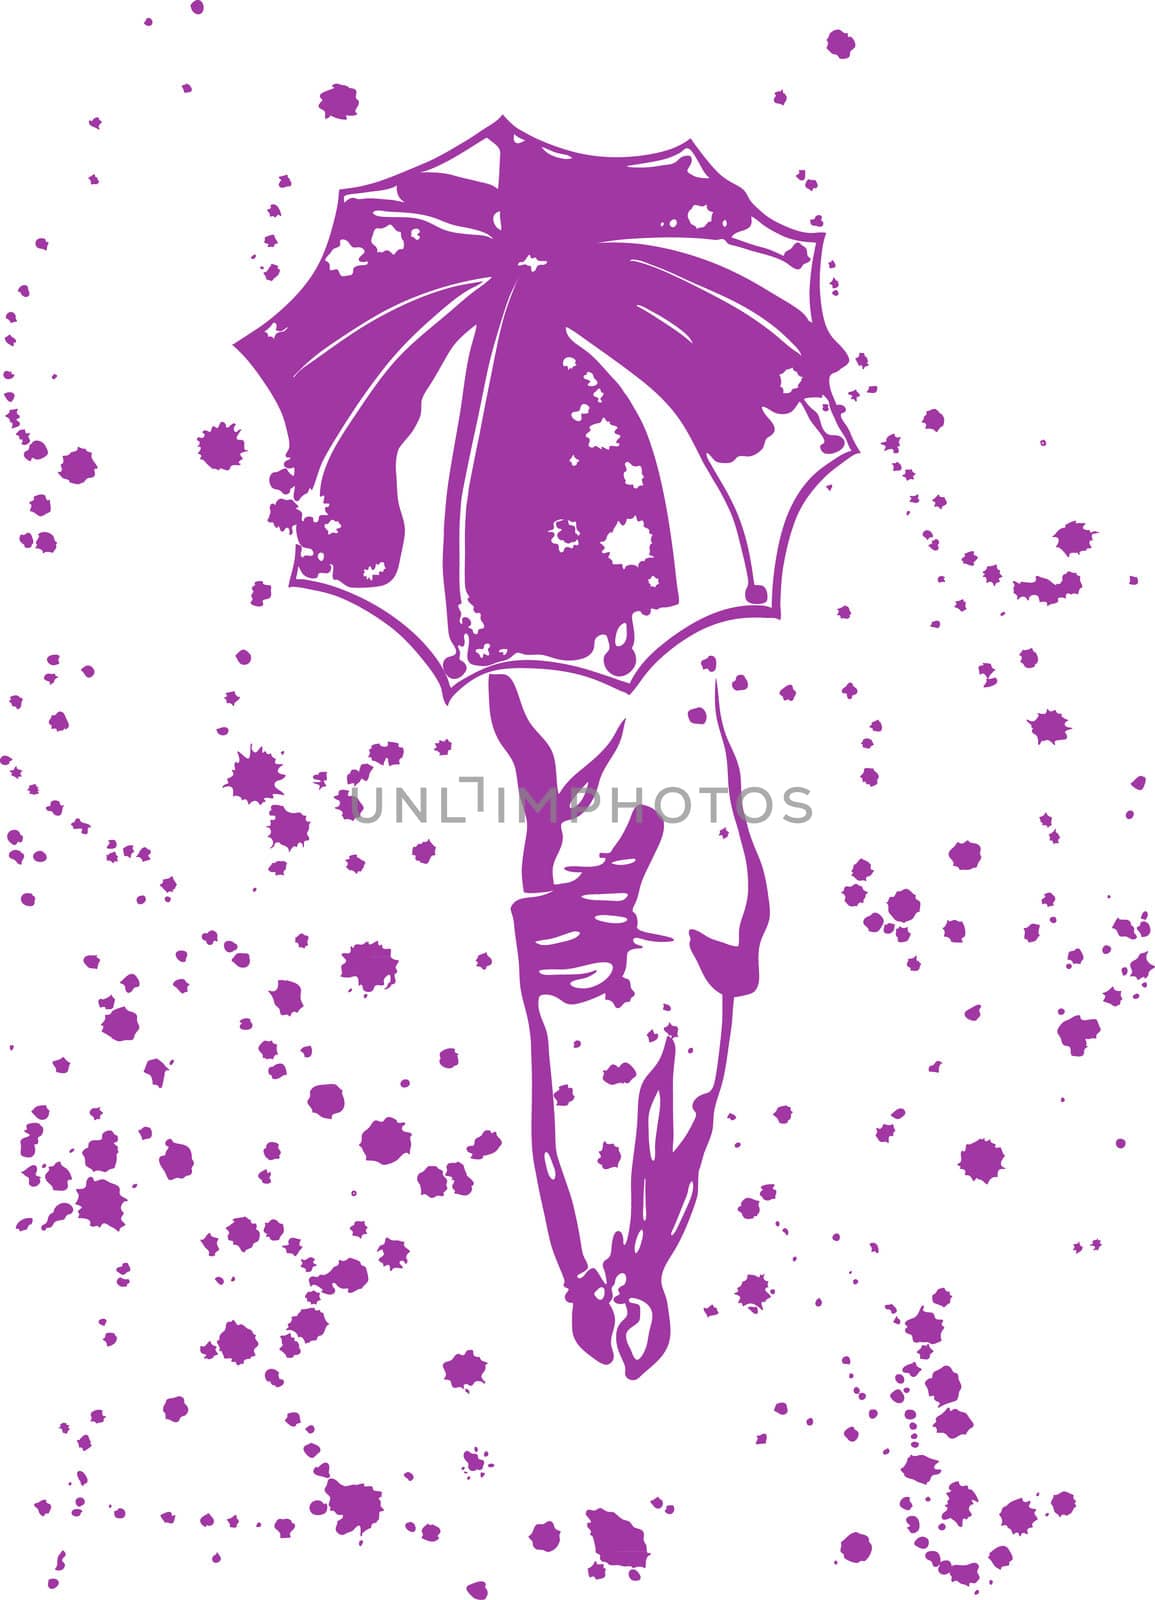 Abstract composition - girl with an umbrella by konstantinova